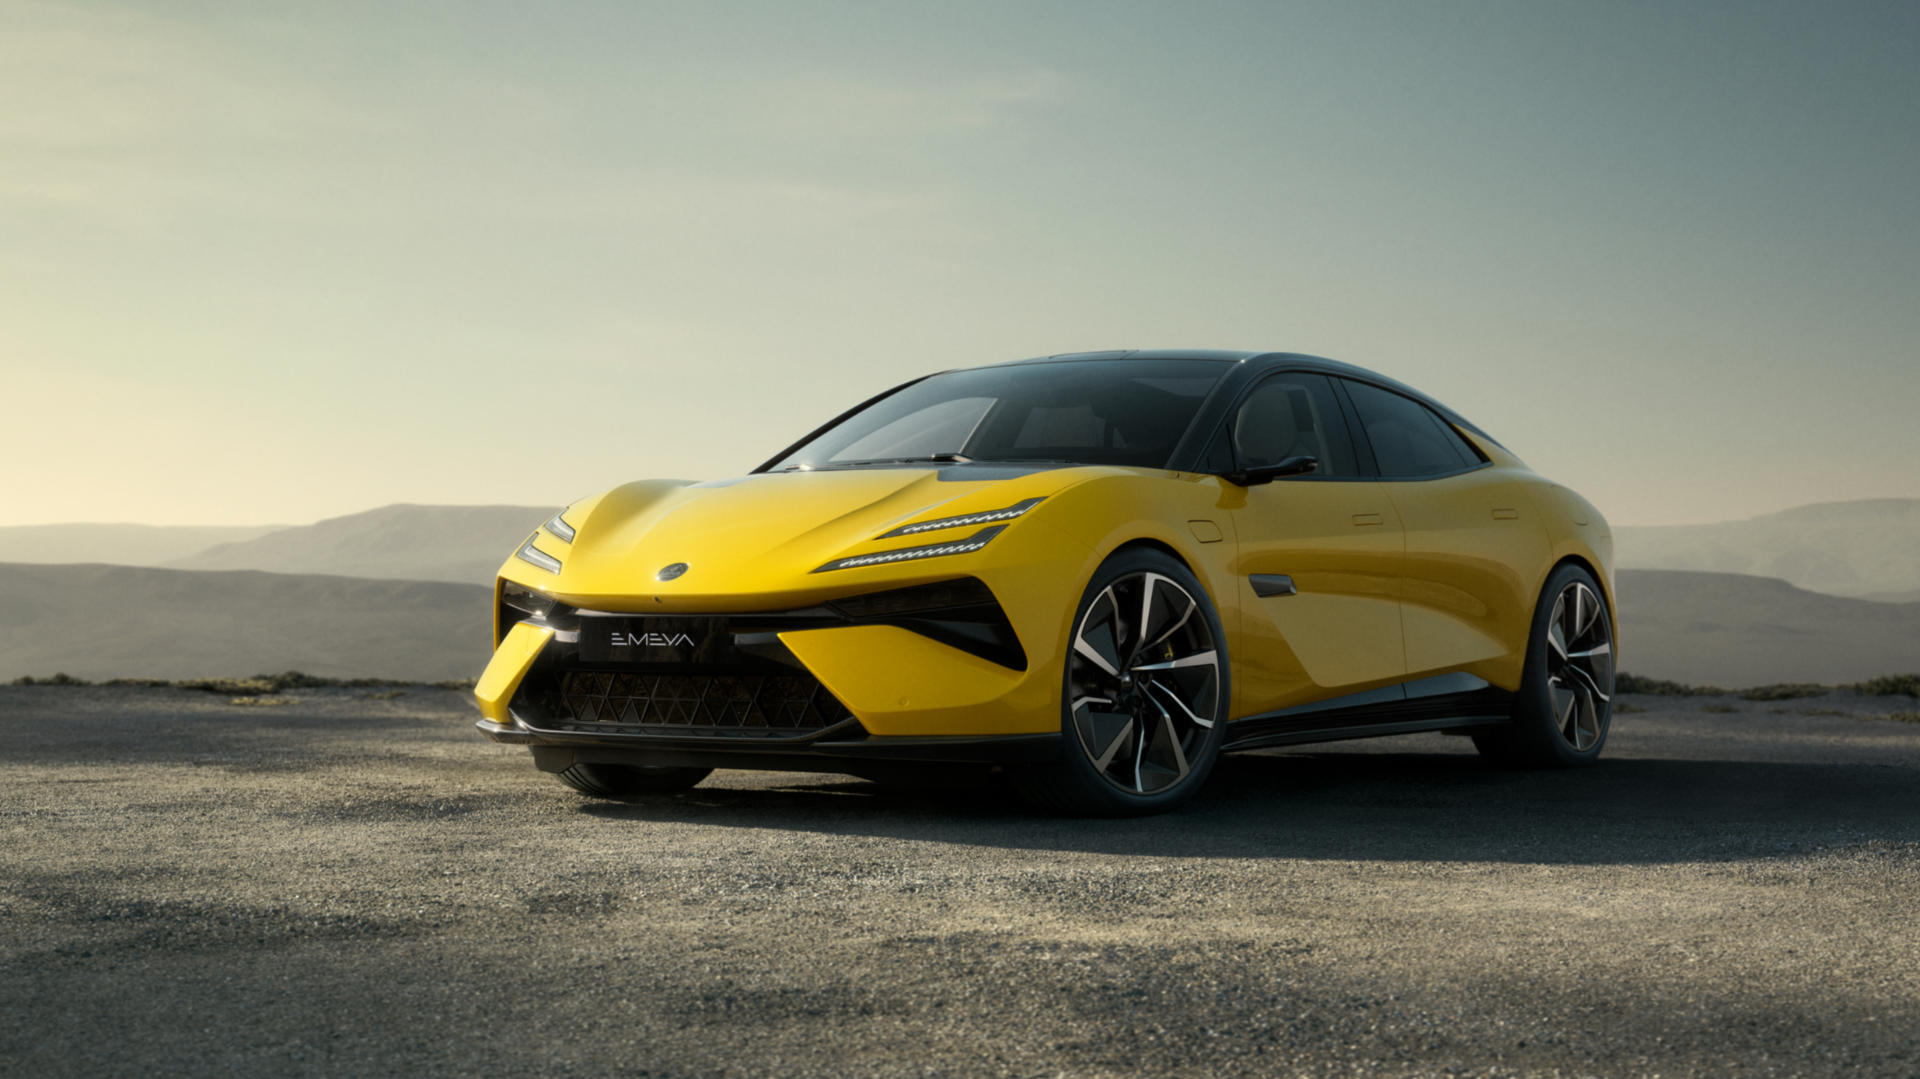 Lotus Emeya Electric Sedan Revealed With 905hp & Four Doors: To Rival Porsche Taycan